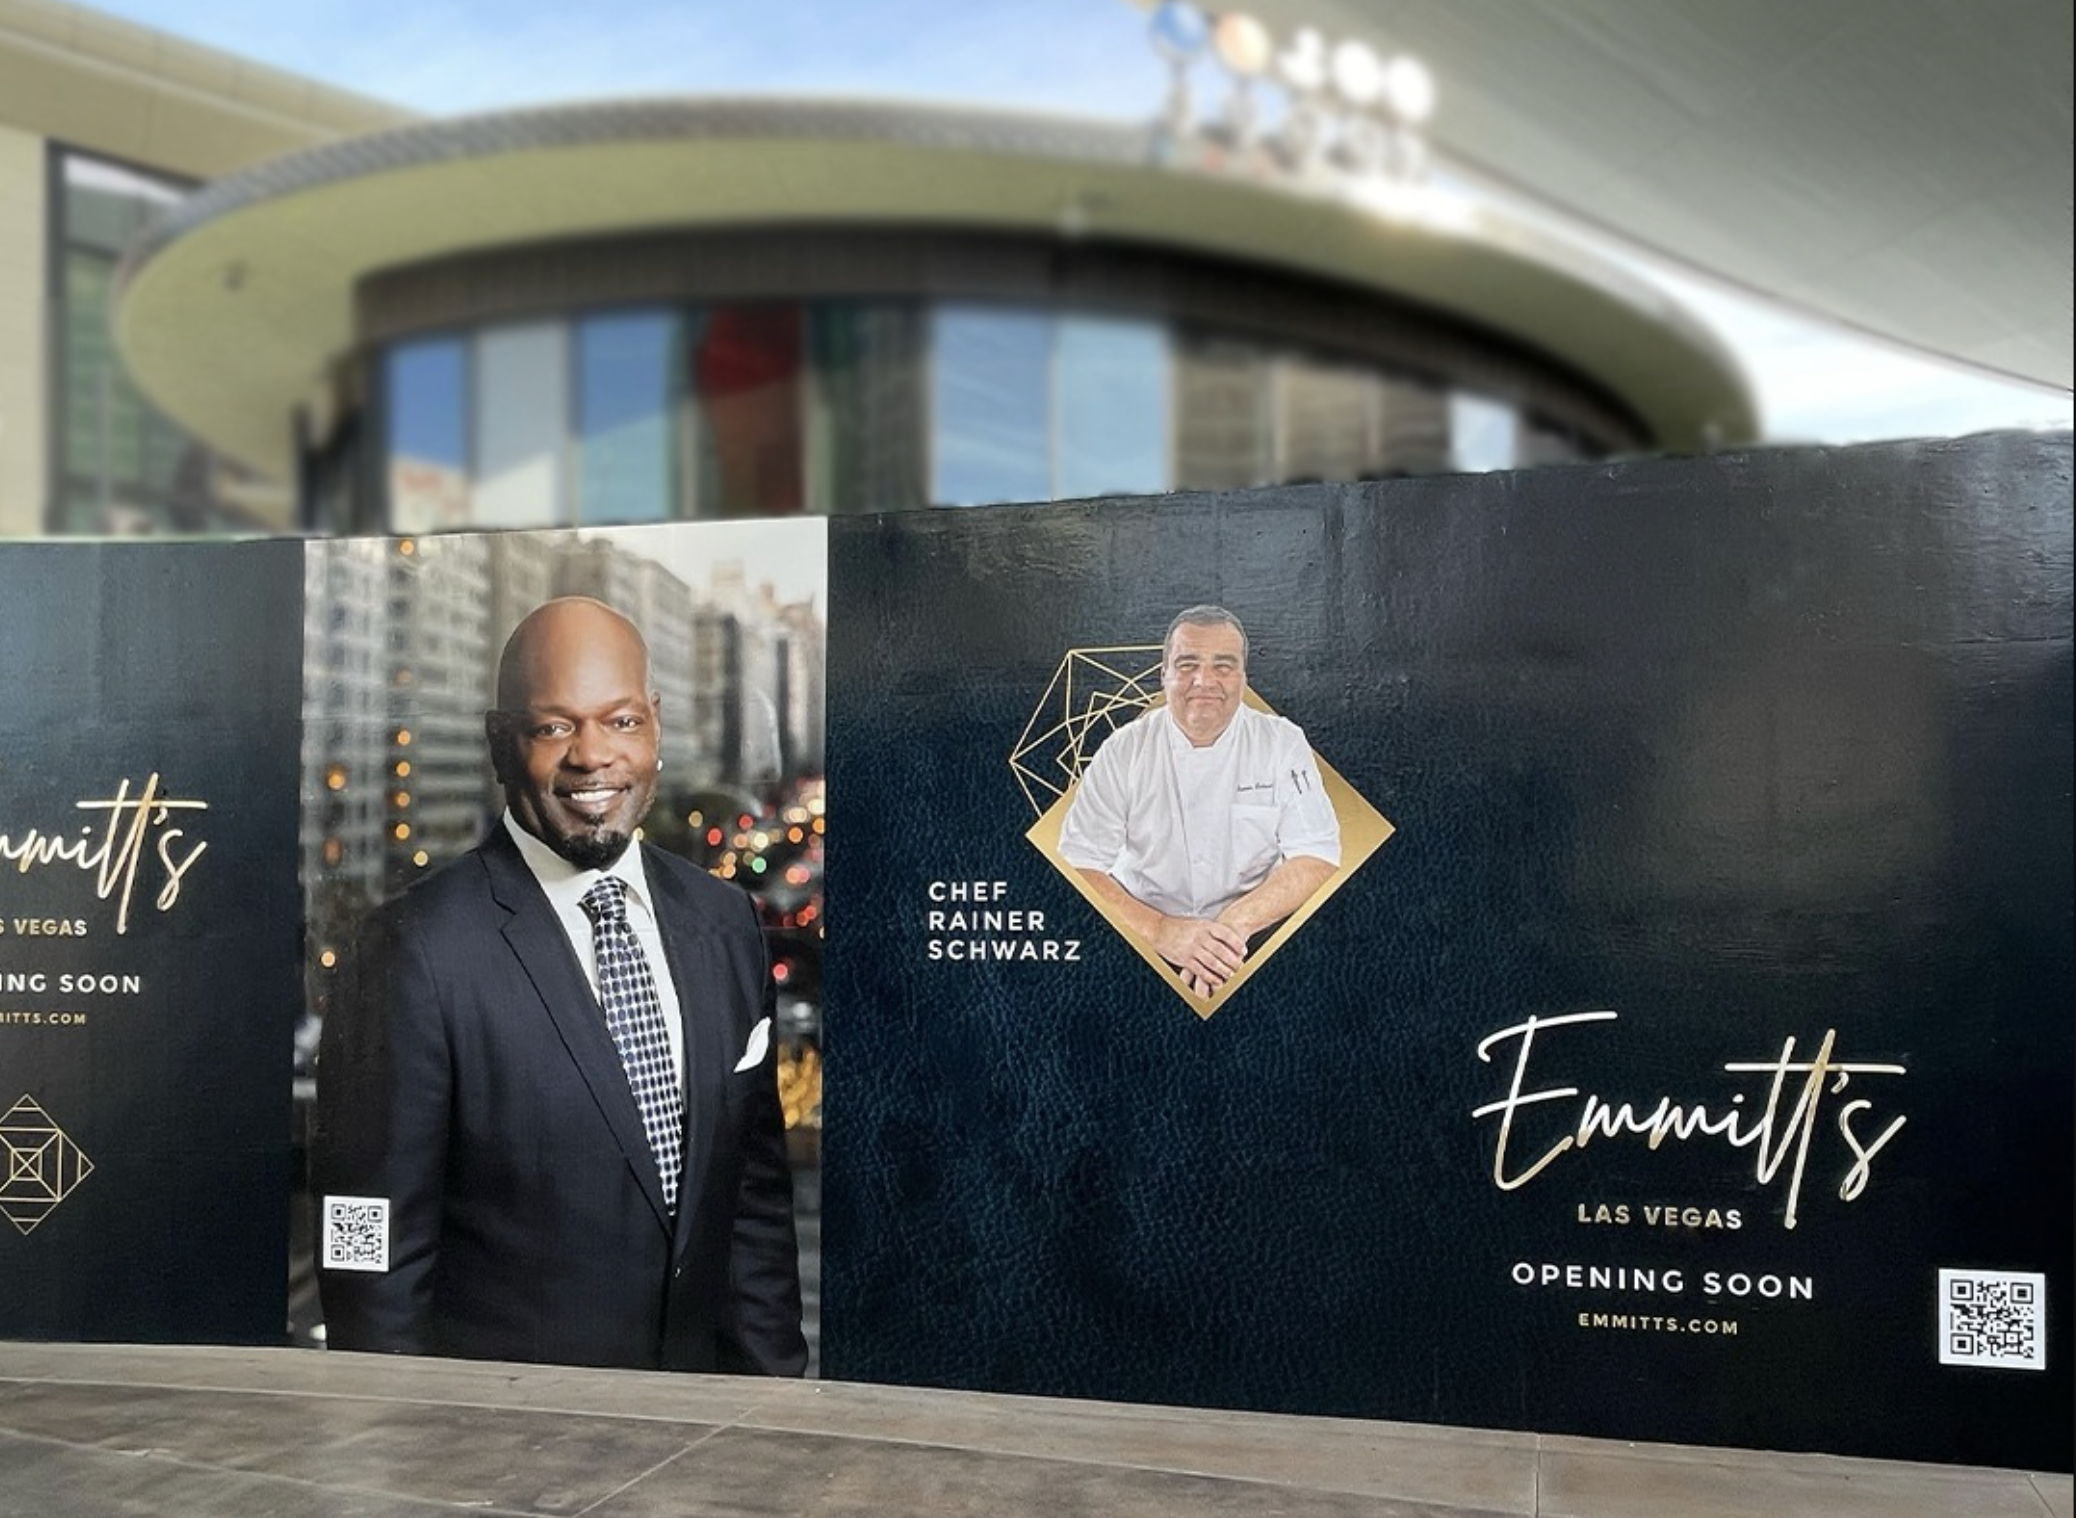 A sign for Emmitt’s Las Vegas at Fashion Show Mall.